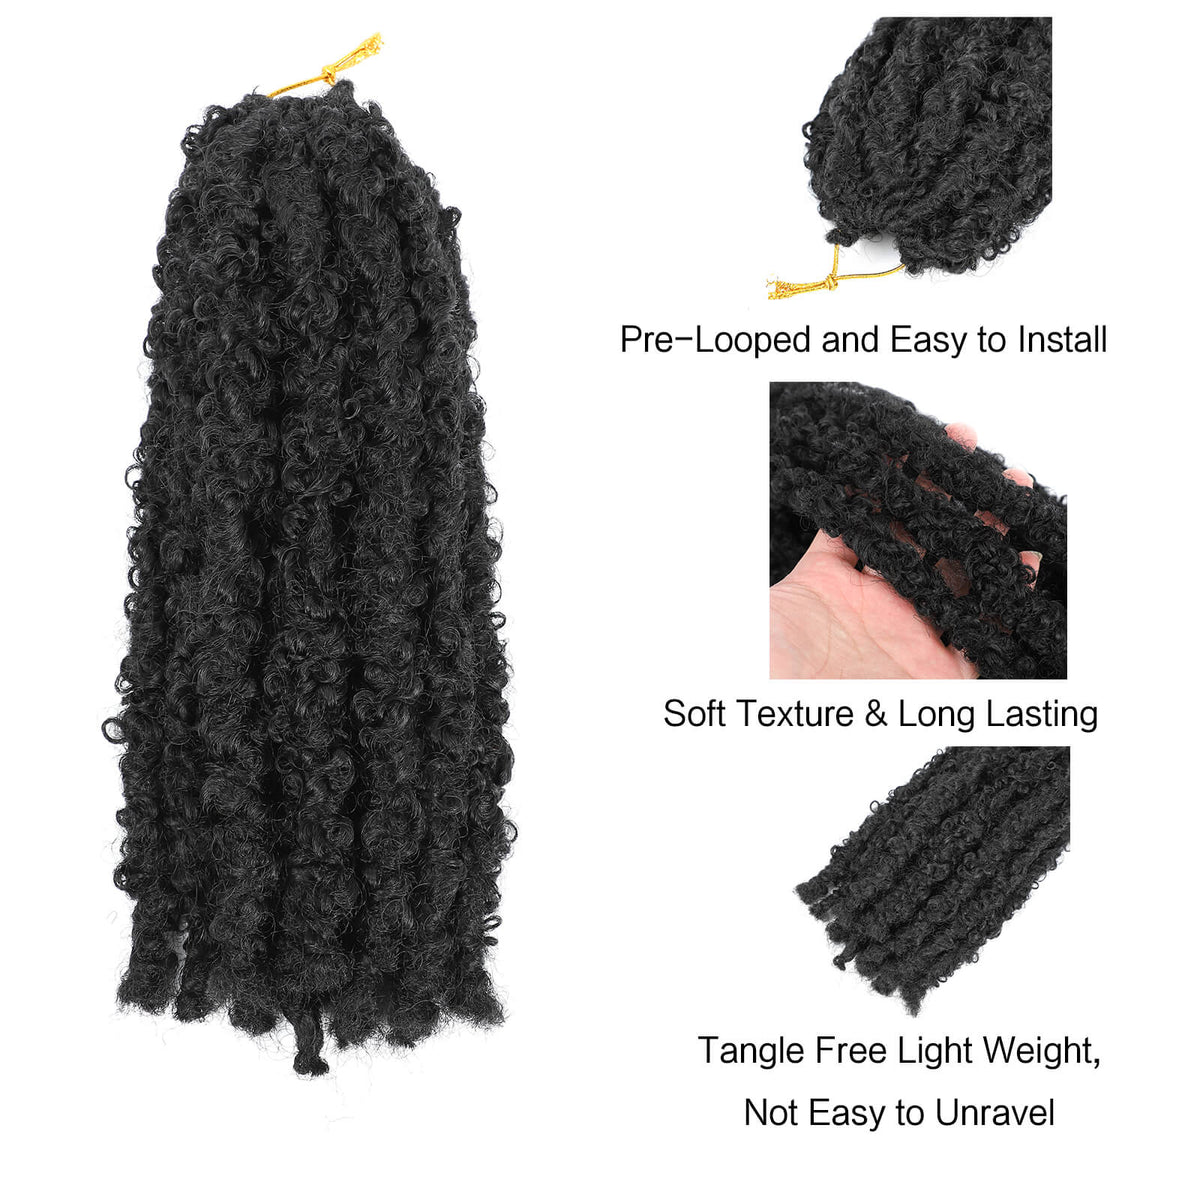 Butterfly Locs Crochet Black Braids From Top to Ends Detail Show